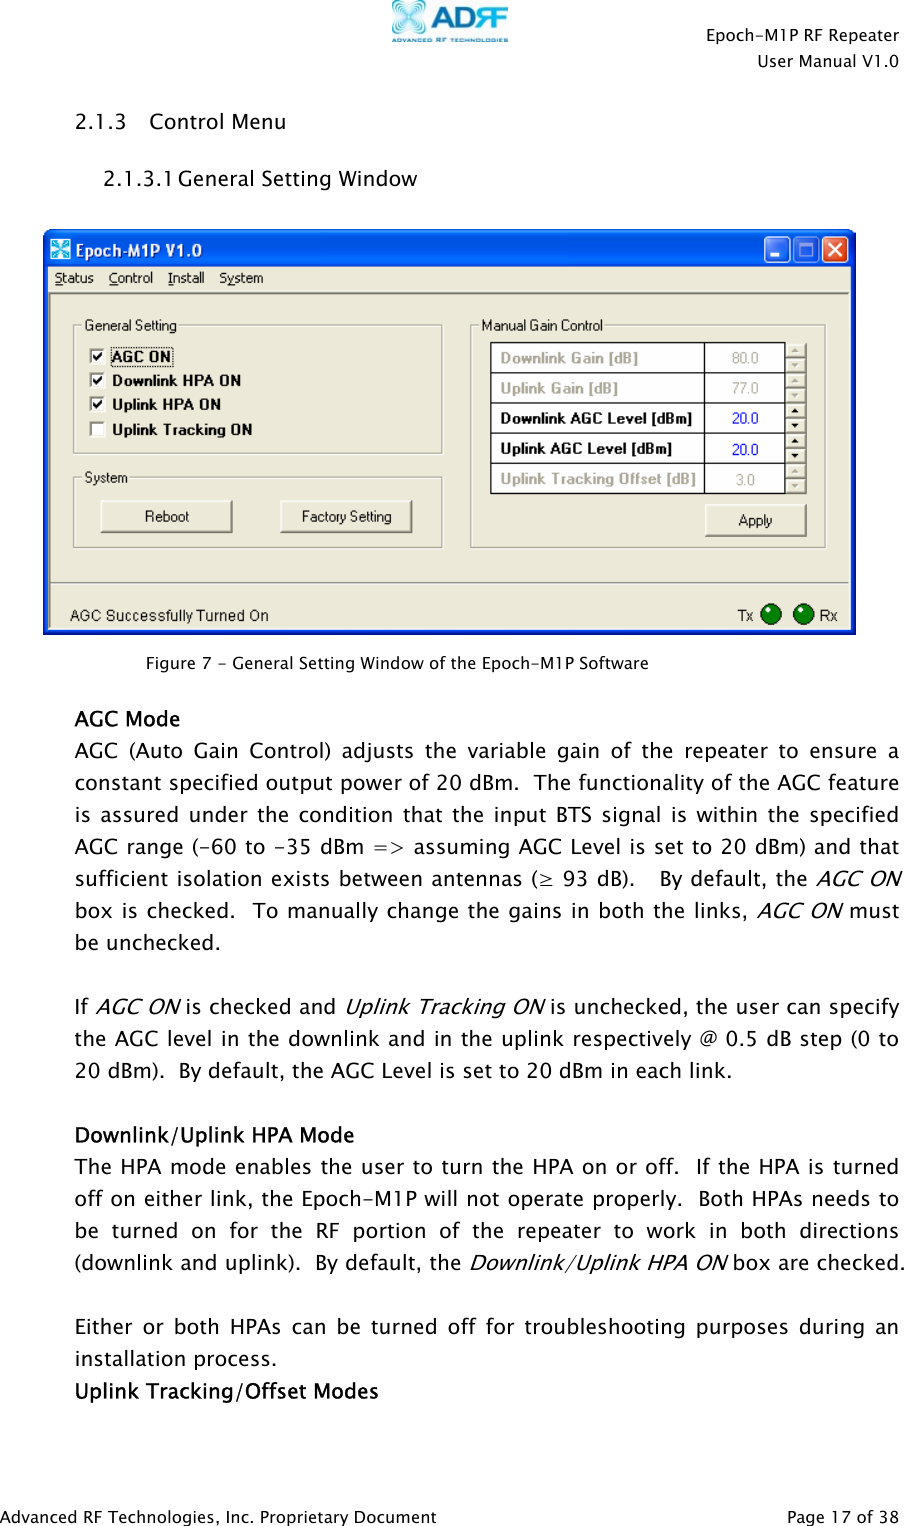    Epoch-M1P RF Repeater  User Manual V1.0  2.1.3 Control Menu 2.1.3.1 General Setting Window    Figure 7 - General Setting Window of the Epoch-M1P Software   AGC Mode AGC (Auto Gain Control) adjusts the variable gain of the repeater to ensure a constant specified output power of 20 dBm.  The functionality of the AGC feature is assured under the condition that the input BTS signal is within the specified AGC range (-60 to -35 dBm =&gt; assuming AGC Level is set to 20 dBm) and that sufficient isolation exists between antennas (≥ 93 dB).   By default, the AGC ONbox is checked.  To manually change the gains in both the links, AGC ON must be unchecked.     If AGC ON is checked and Uplink Tracking ON is unchecked, the user can specify the AGC level in the downlink and in the uplink respectively @ 0.5 dB step (0 to 20 dBm).  By default, the AGC Level is set to 20 dBm in each link.    Downlink/Uplink HPA Mode The HPA mode enables the user to turn the HPA on or off.  If the HPA is turned off on either link, the Epoch-M1P will not operate properly.  Both HPAs needs to be turned on for the RF portion of the repeater to work in both directions (downlink and uplink).  By default, the Downlink/Uplink HPA ON box are checked.  Either or both HPAs can be turned off for troubleshooting purposes during an installation process. Uplink Tracking/Offset Modes Advanced RF Technologies, Inc. Proprietary Document   Page 17 of 38  